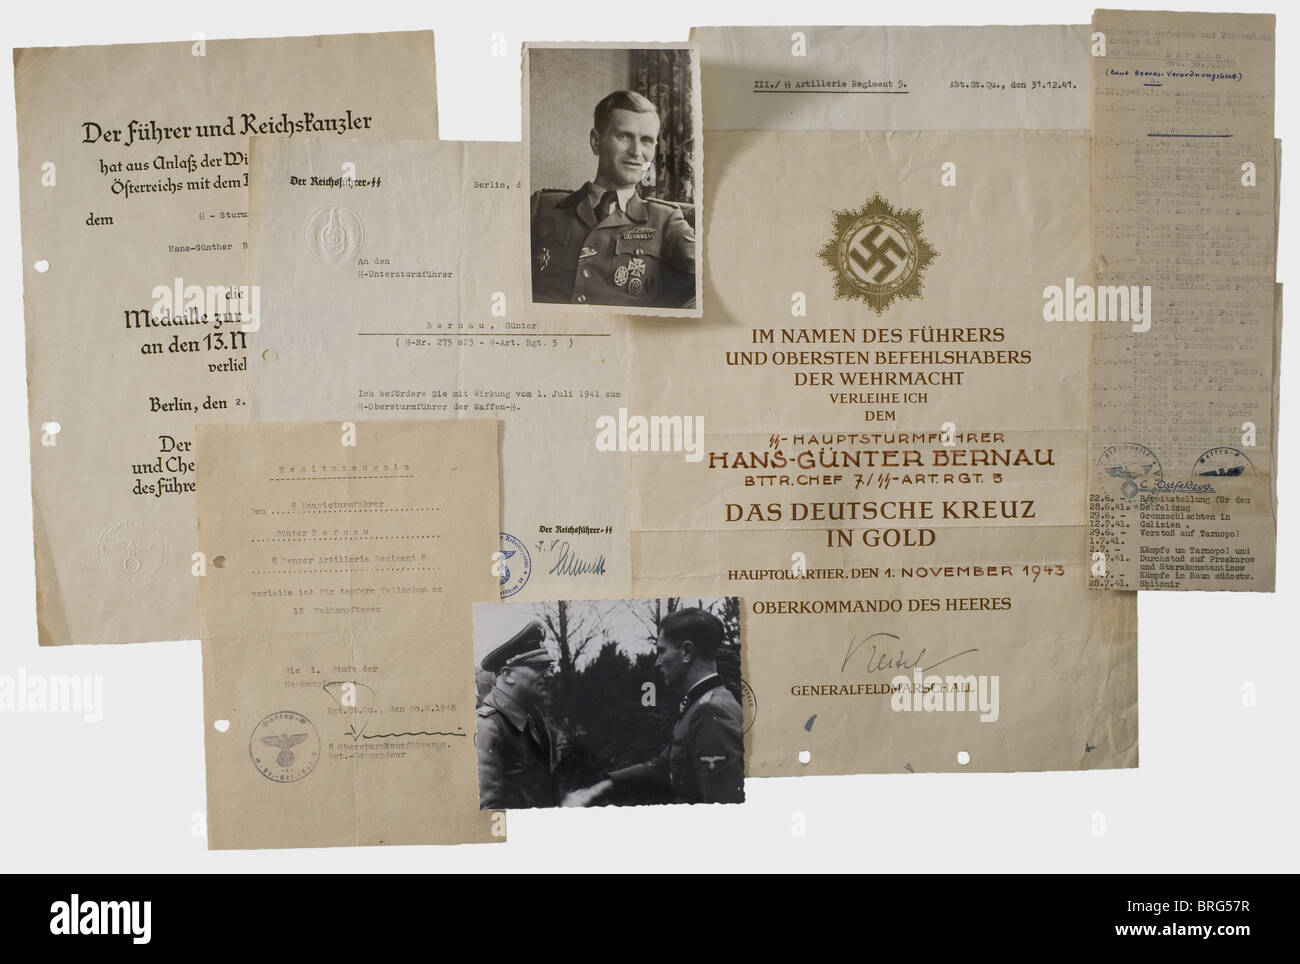 SS-Sturmbannführer Hans-Günther Bernau, award certificates and documents Large, elaborate award document for the German Cross in Gold dated 1 November 1943 as battery commander 7th/SS Artillery Regiment 5 with ink signature of Keitel. Holed, folded and trimmed to ca. 32 x 25 cm size. Award list and a photograph of the award ceremony with SS Major General Gille are included. Typewritten preliminary award notification document for the Close Combat Clasp Grade I for 15 combat days dated 20 April 1945. Award document for the Commemorative Medal of 13 March 1938 dat, Stock Photo